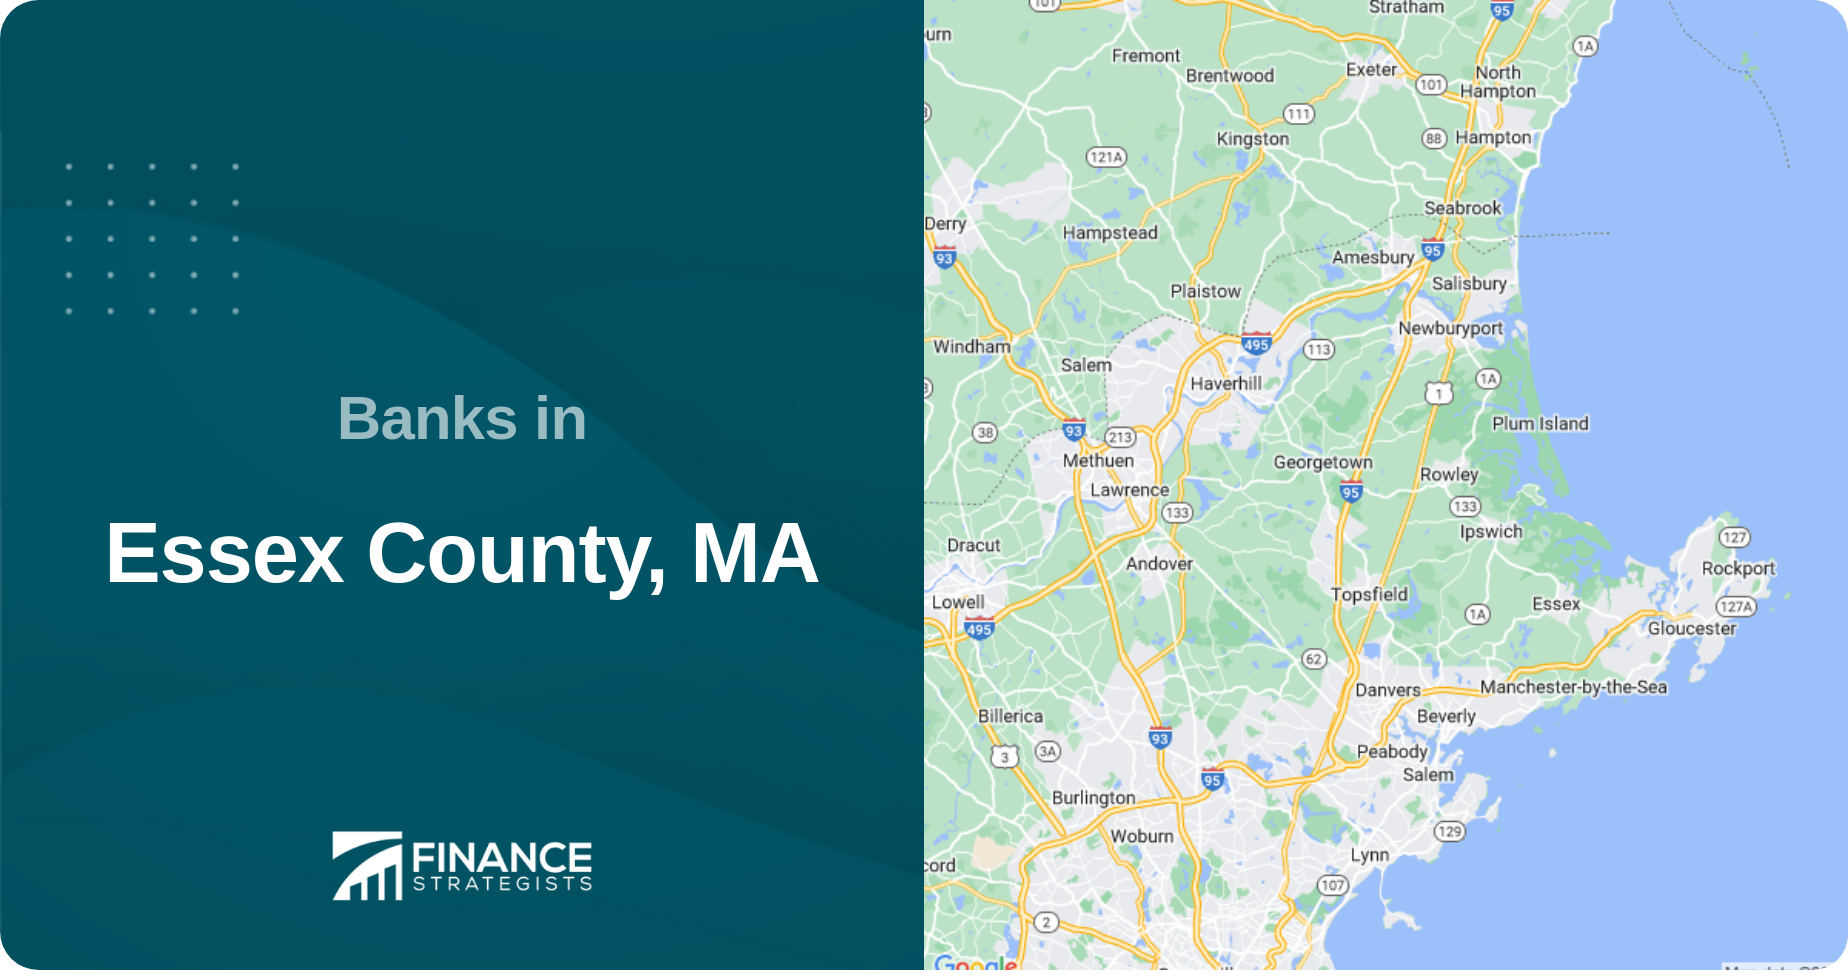 Banks in Essex County, MA